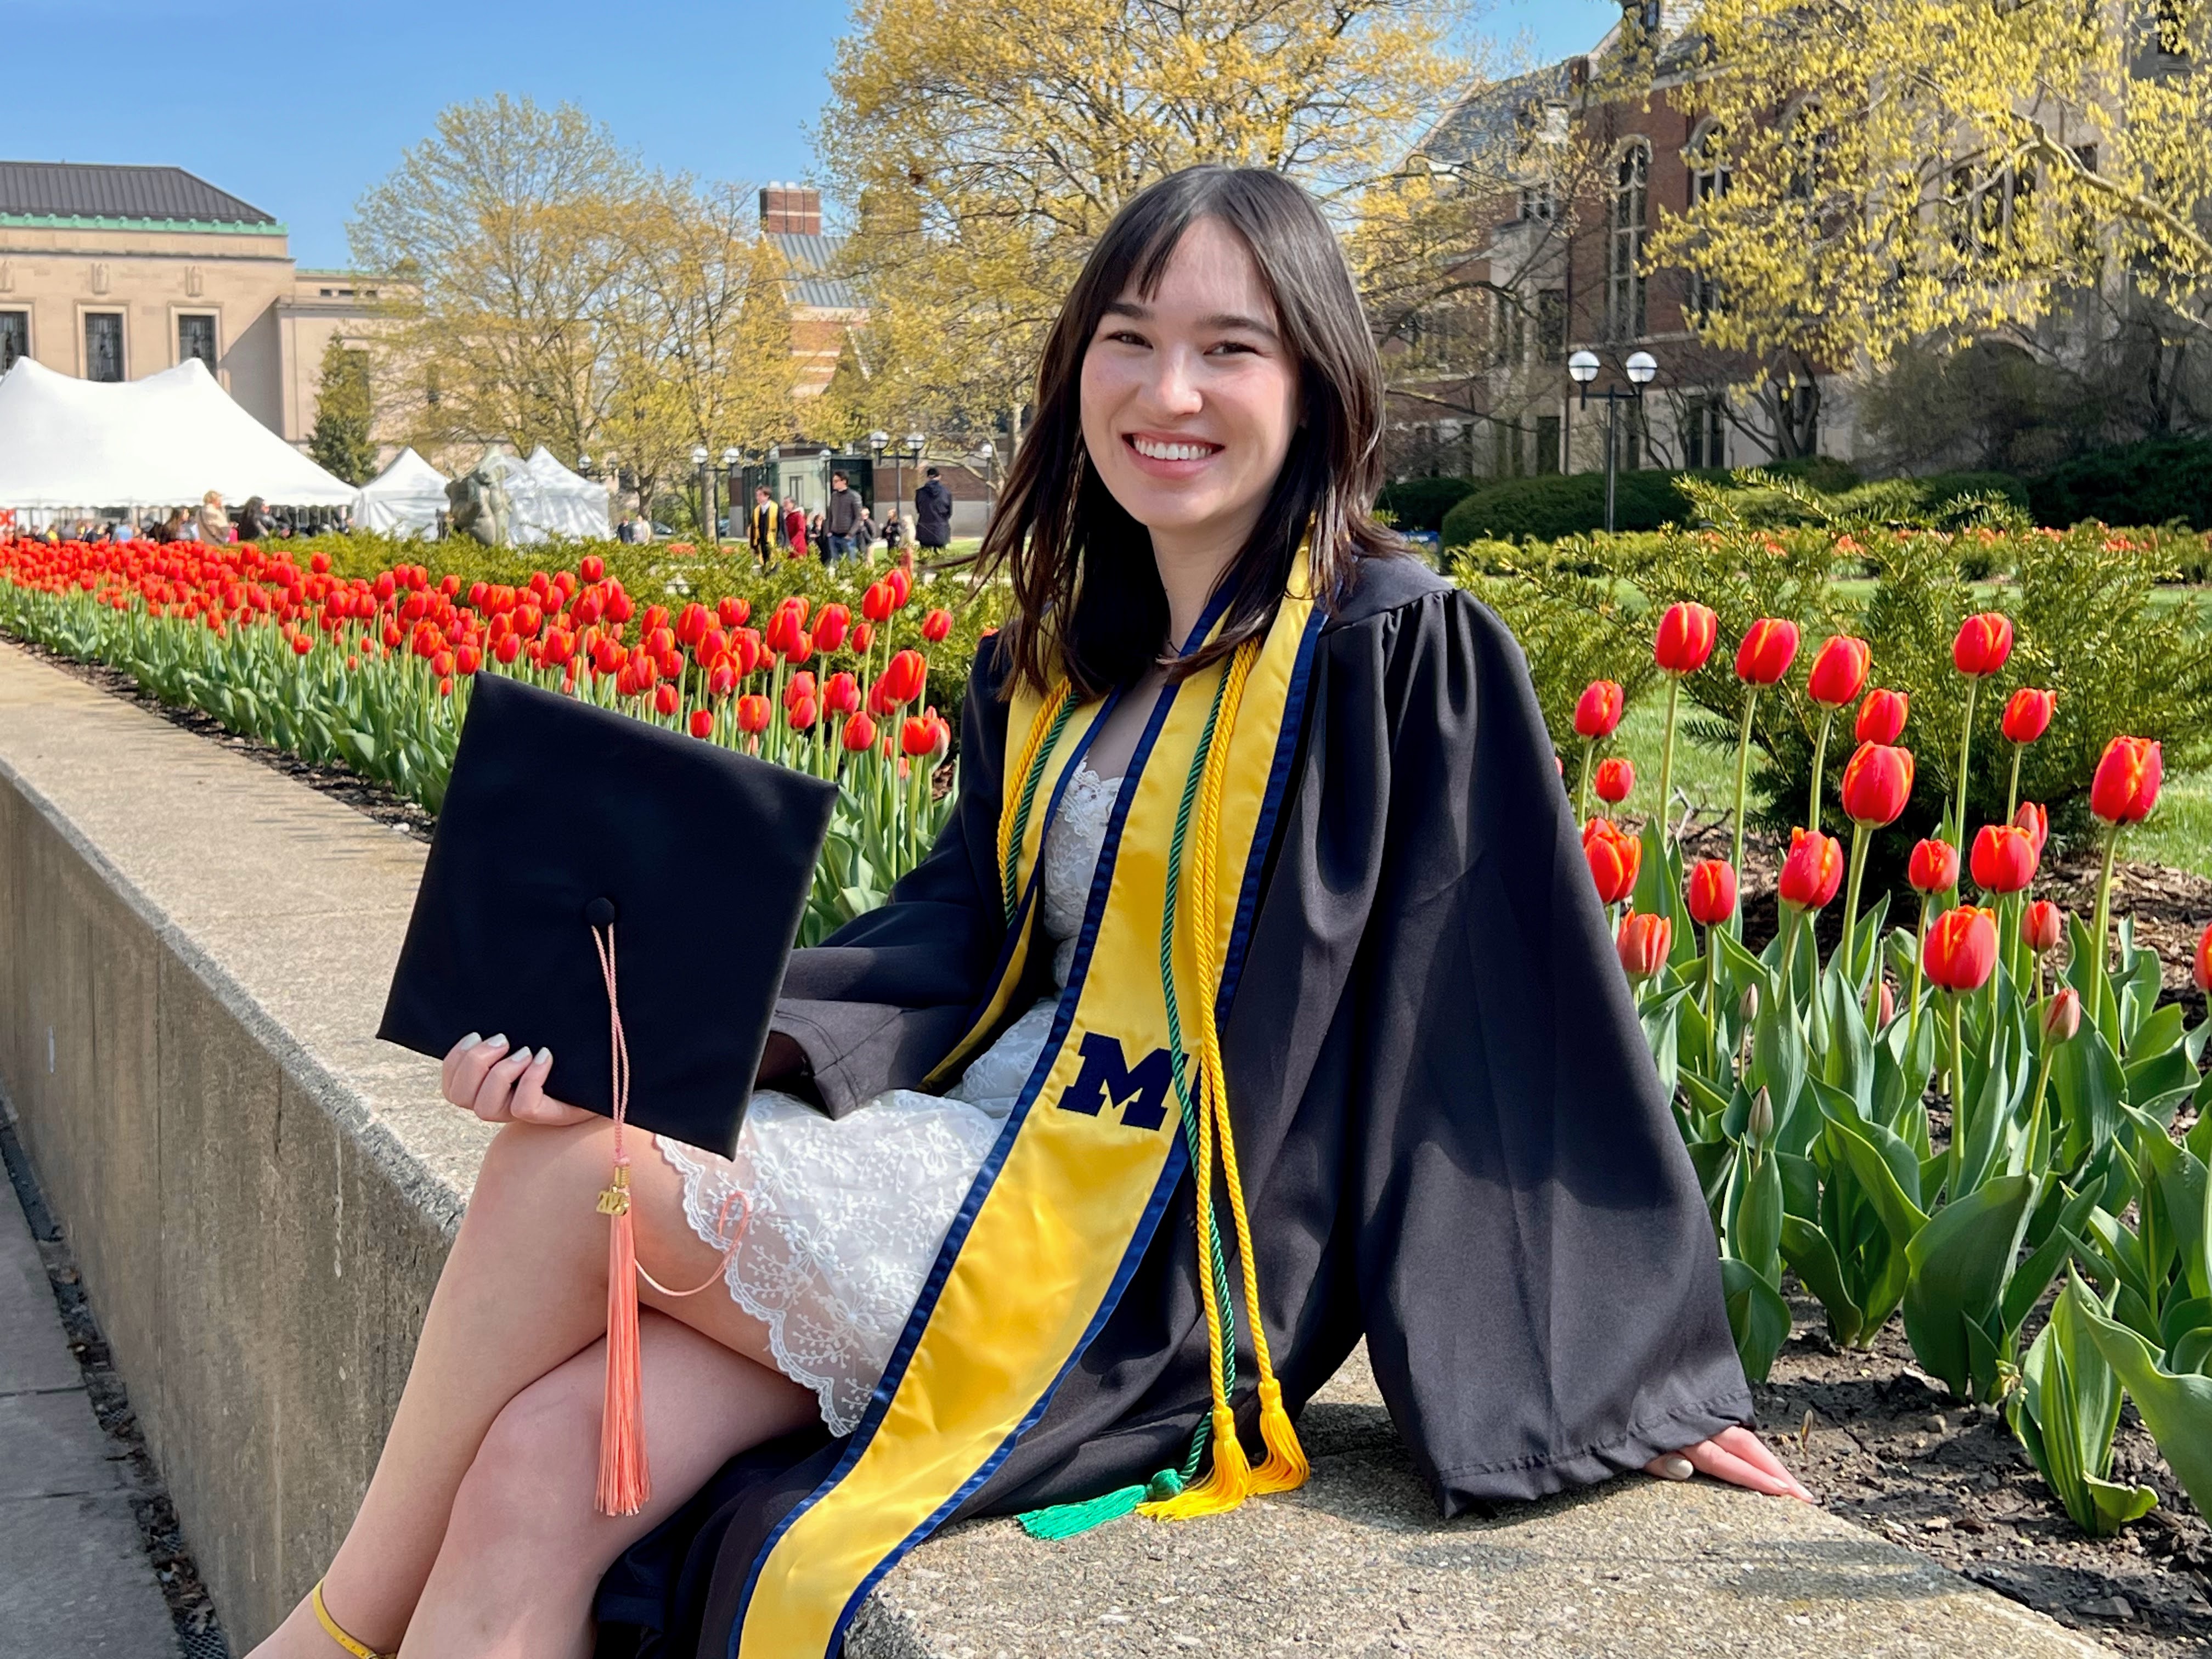 Elisabeth Repp graduated from the University of Michigan School of Public Health in 2023 with a Bachelor of Arts degree in Community and Global Public Health.